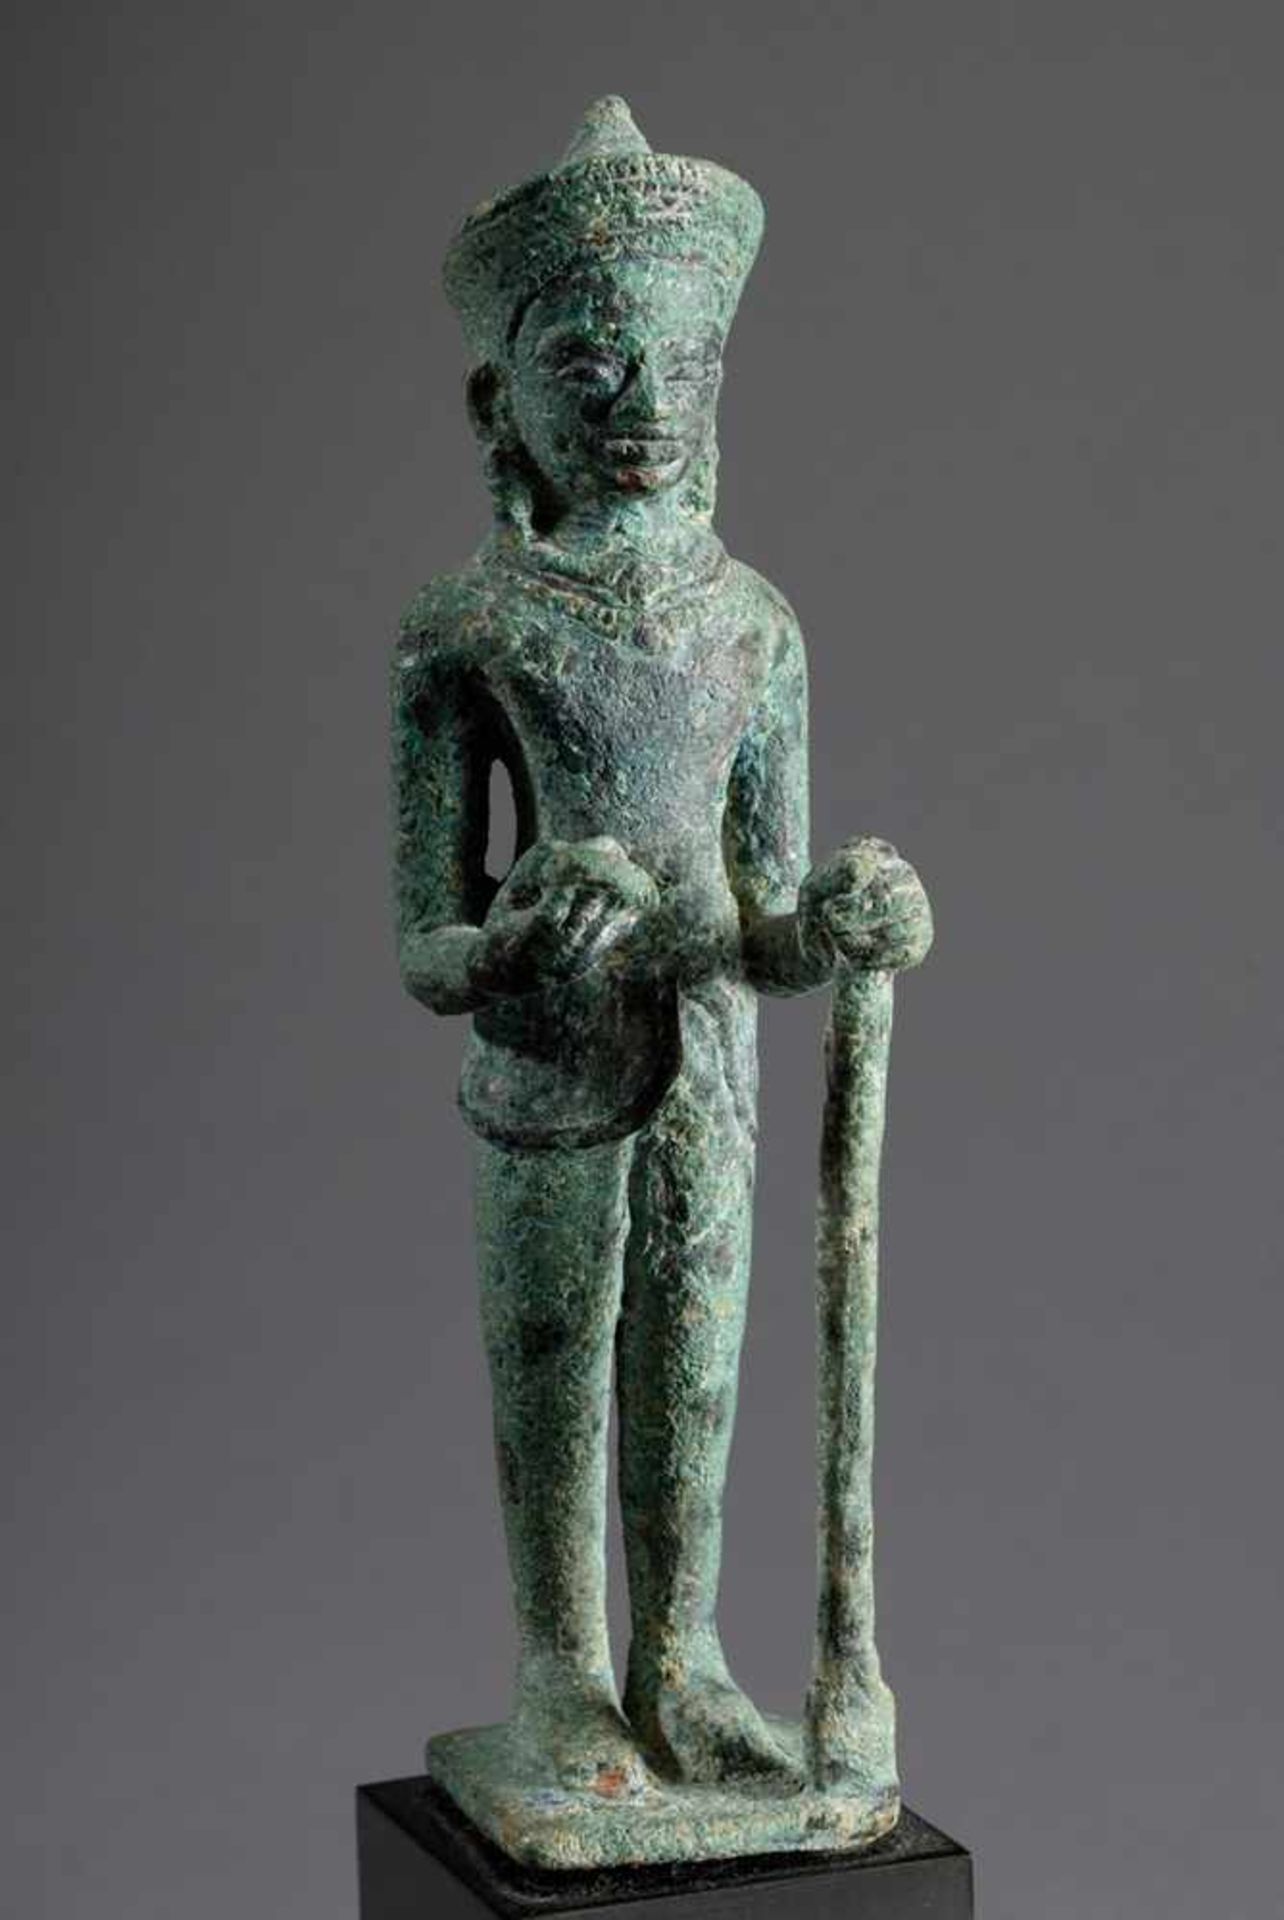 Standing Khmer bronze figure "Godness" holding a chakra in her right hand, probably Shiva, Bayon